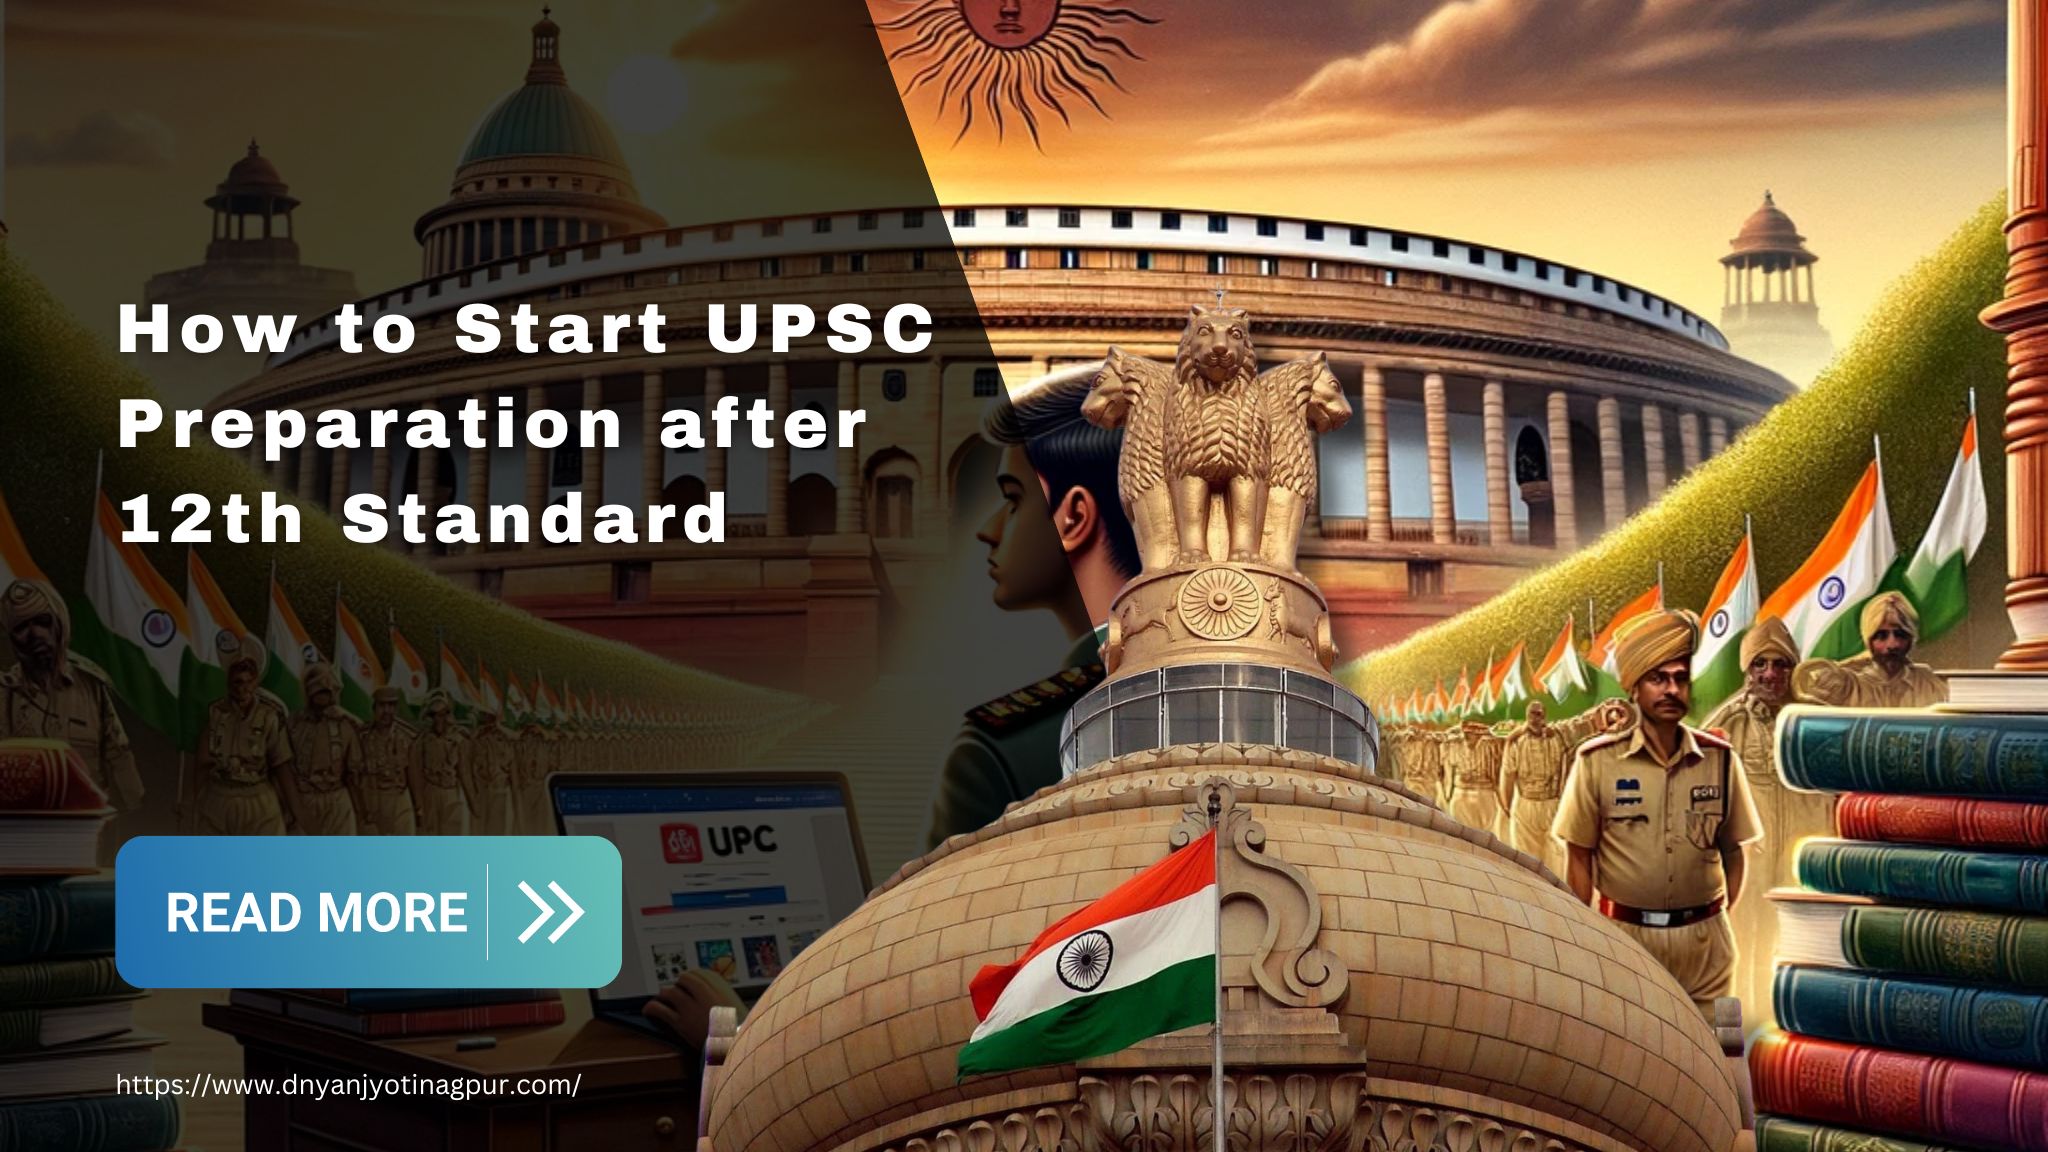 How to Start UPSC Preparation after 12th Standard